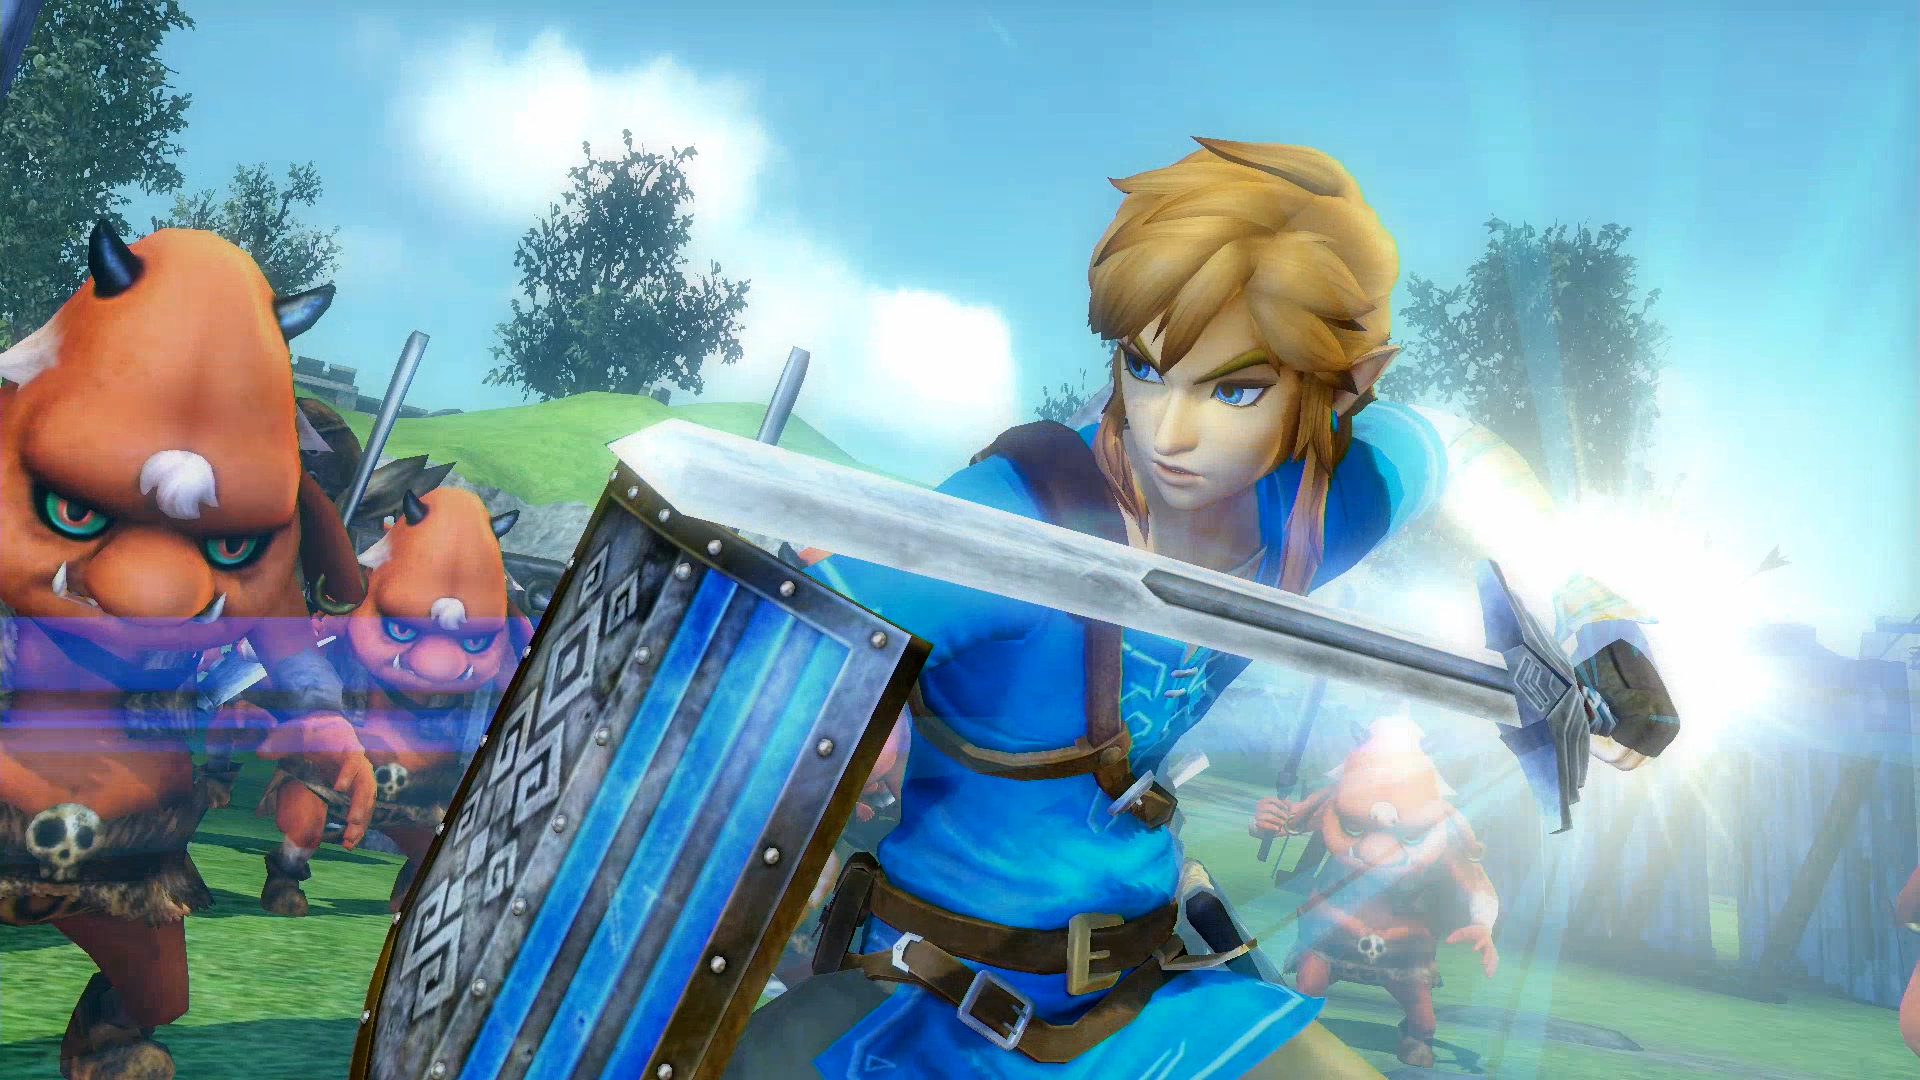 The People Behind Hyrule Warriors Have Two Dream Projects: Mario And Star Wars